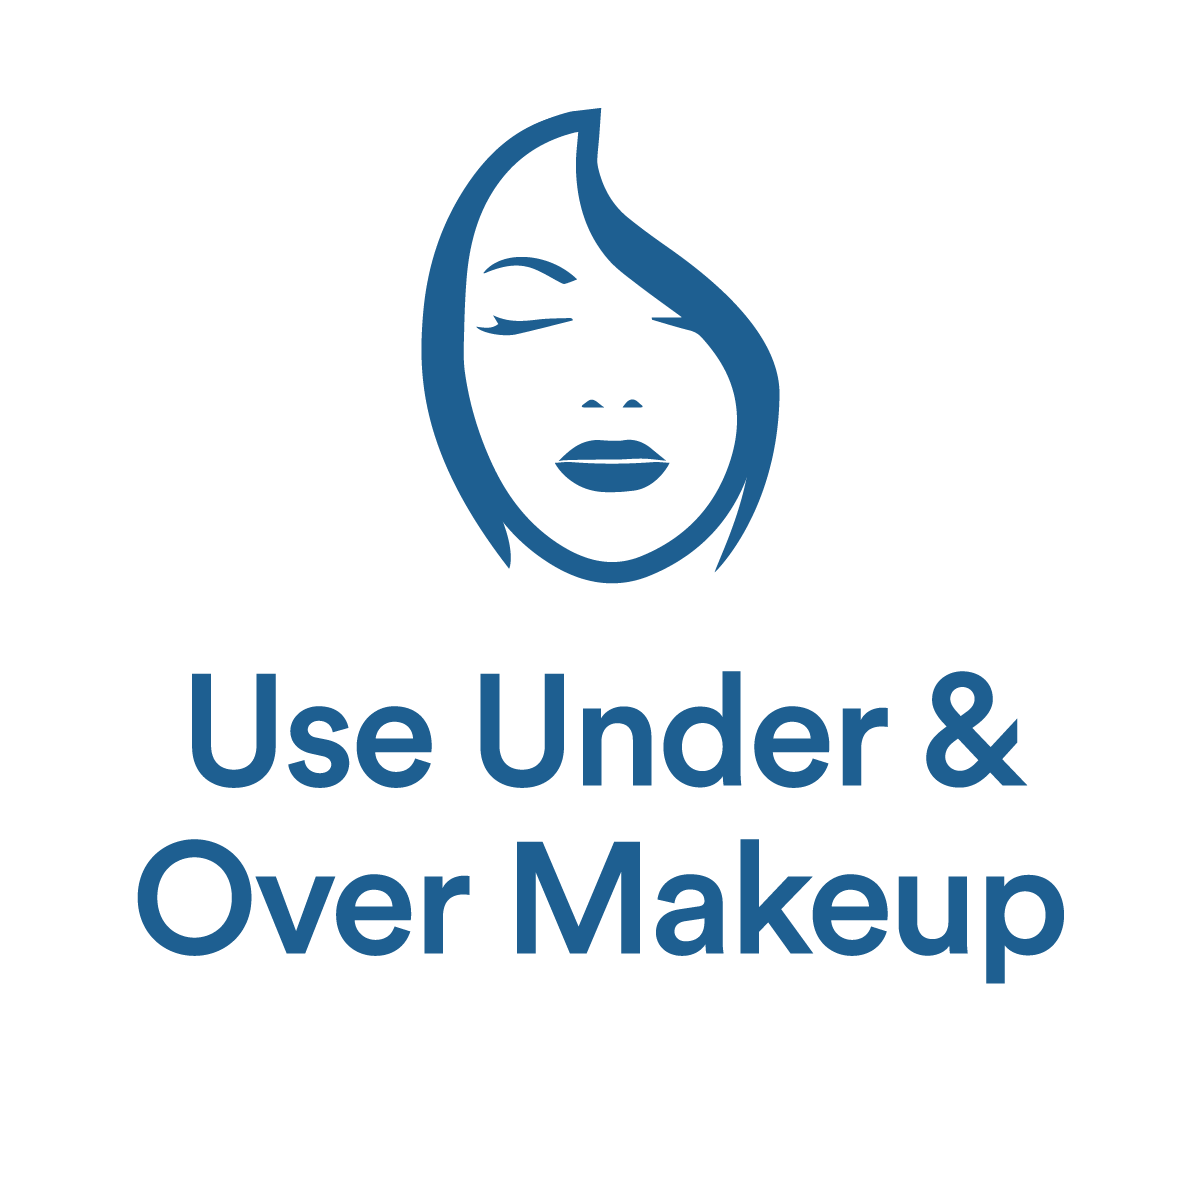 Use under and over makeup